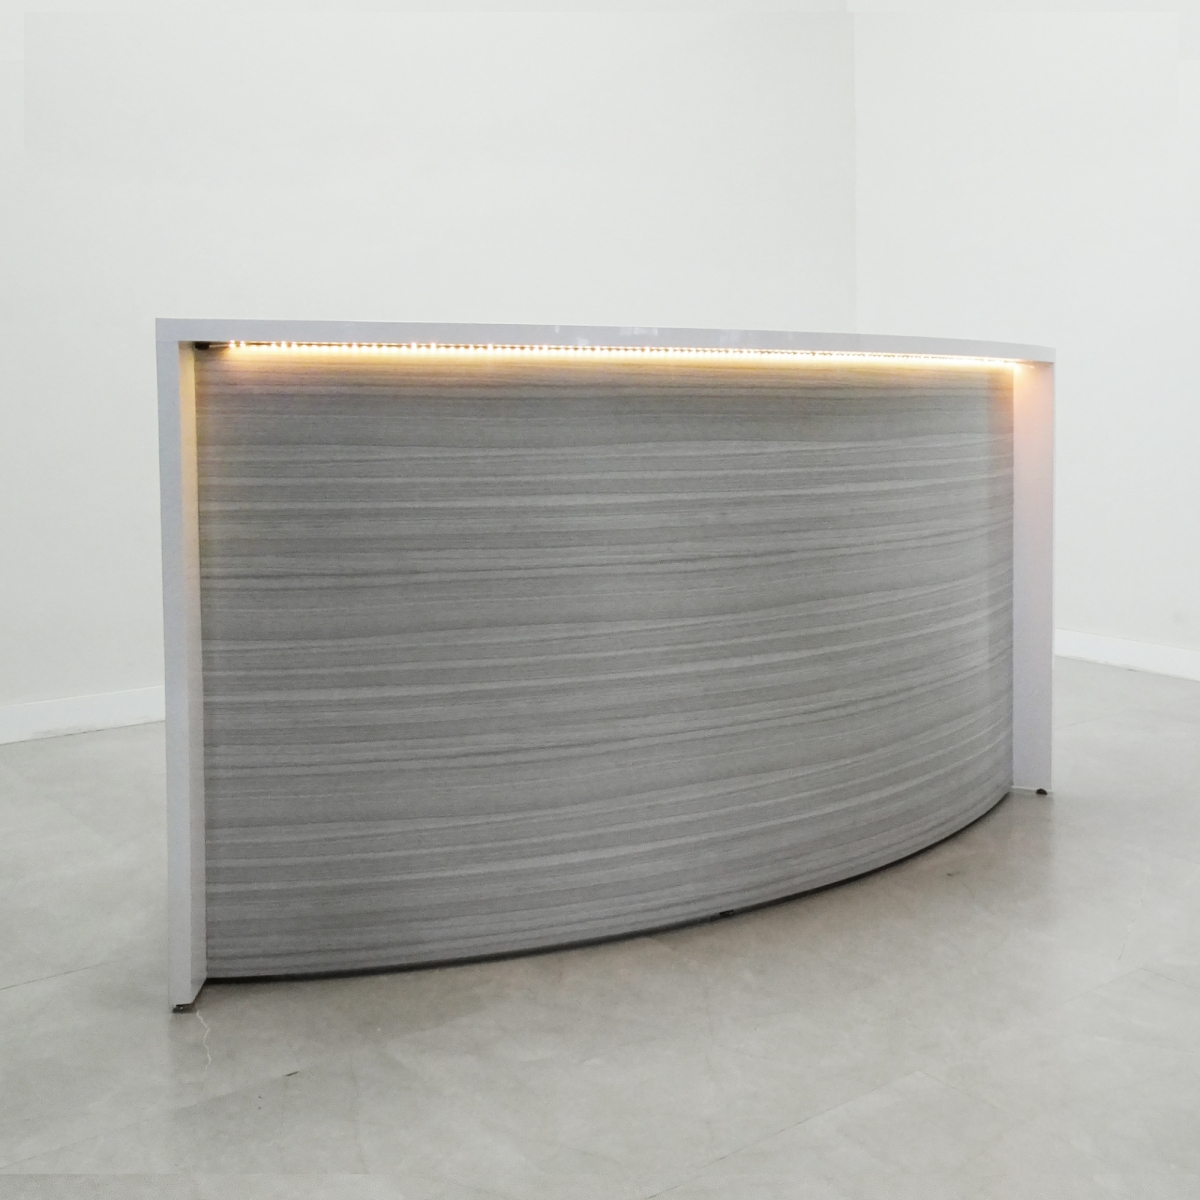 84 In. Seattle Curved Reception Desk - Stock #40